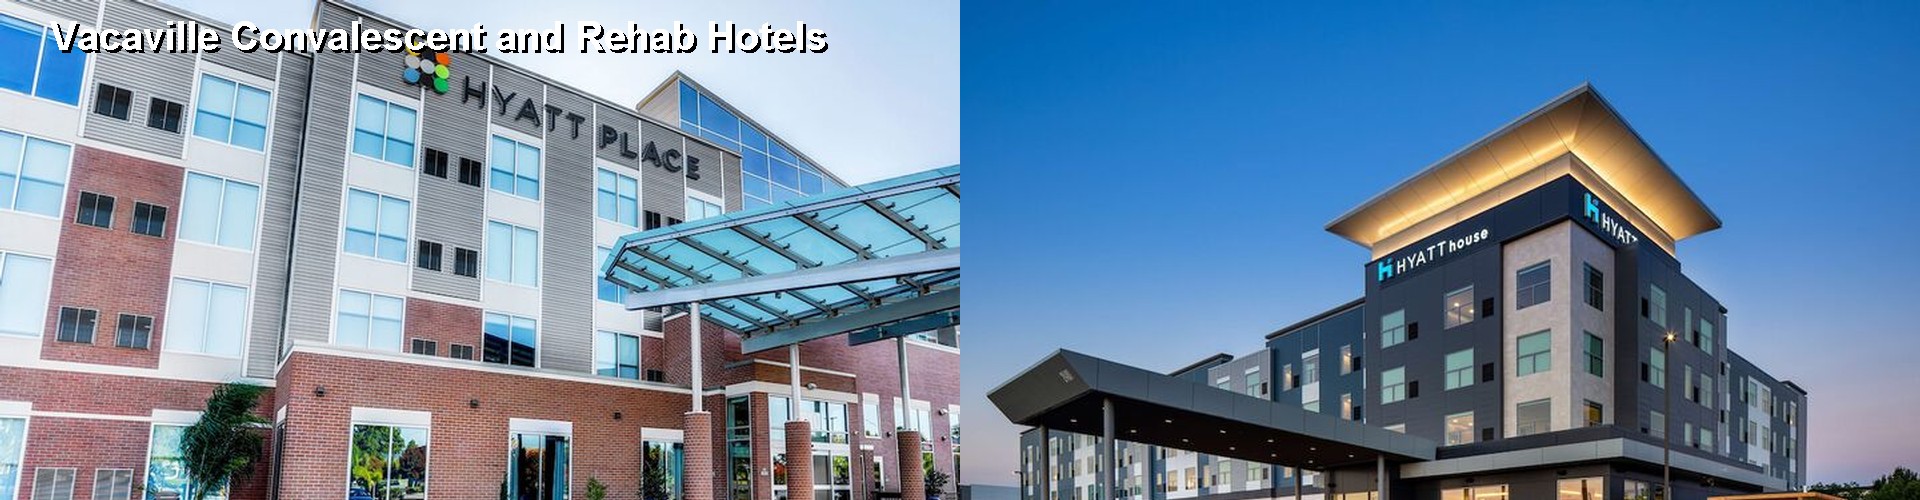 5 Best Hotels near Vacaville Convalescent and Rehab